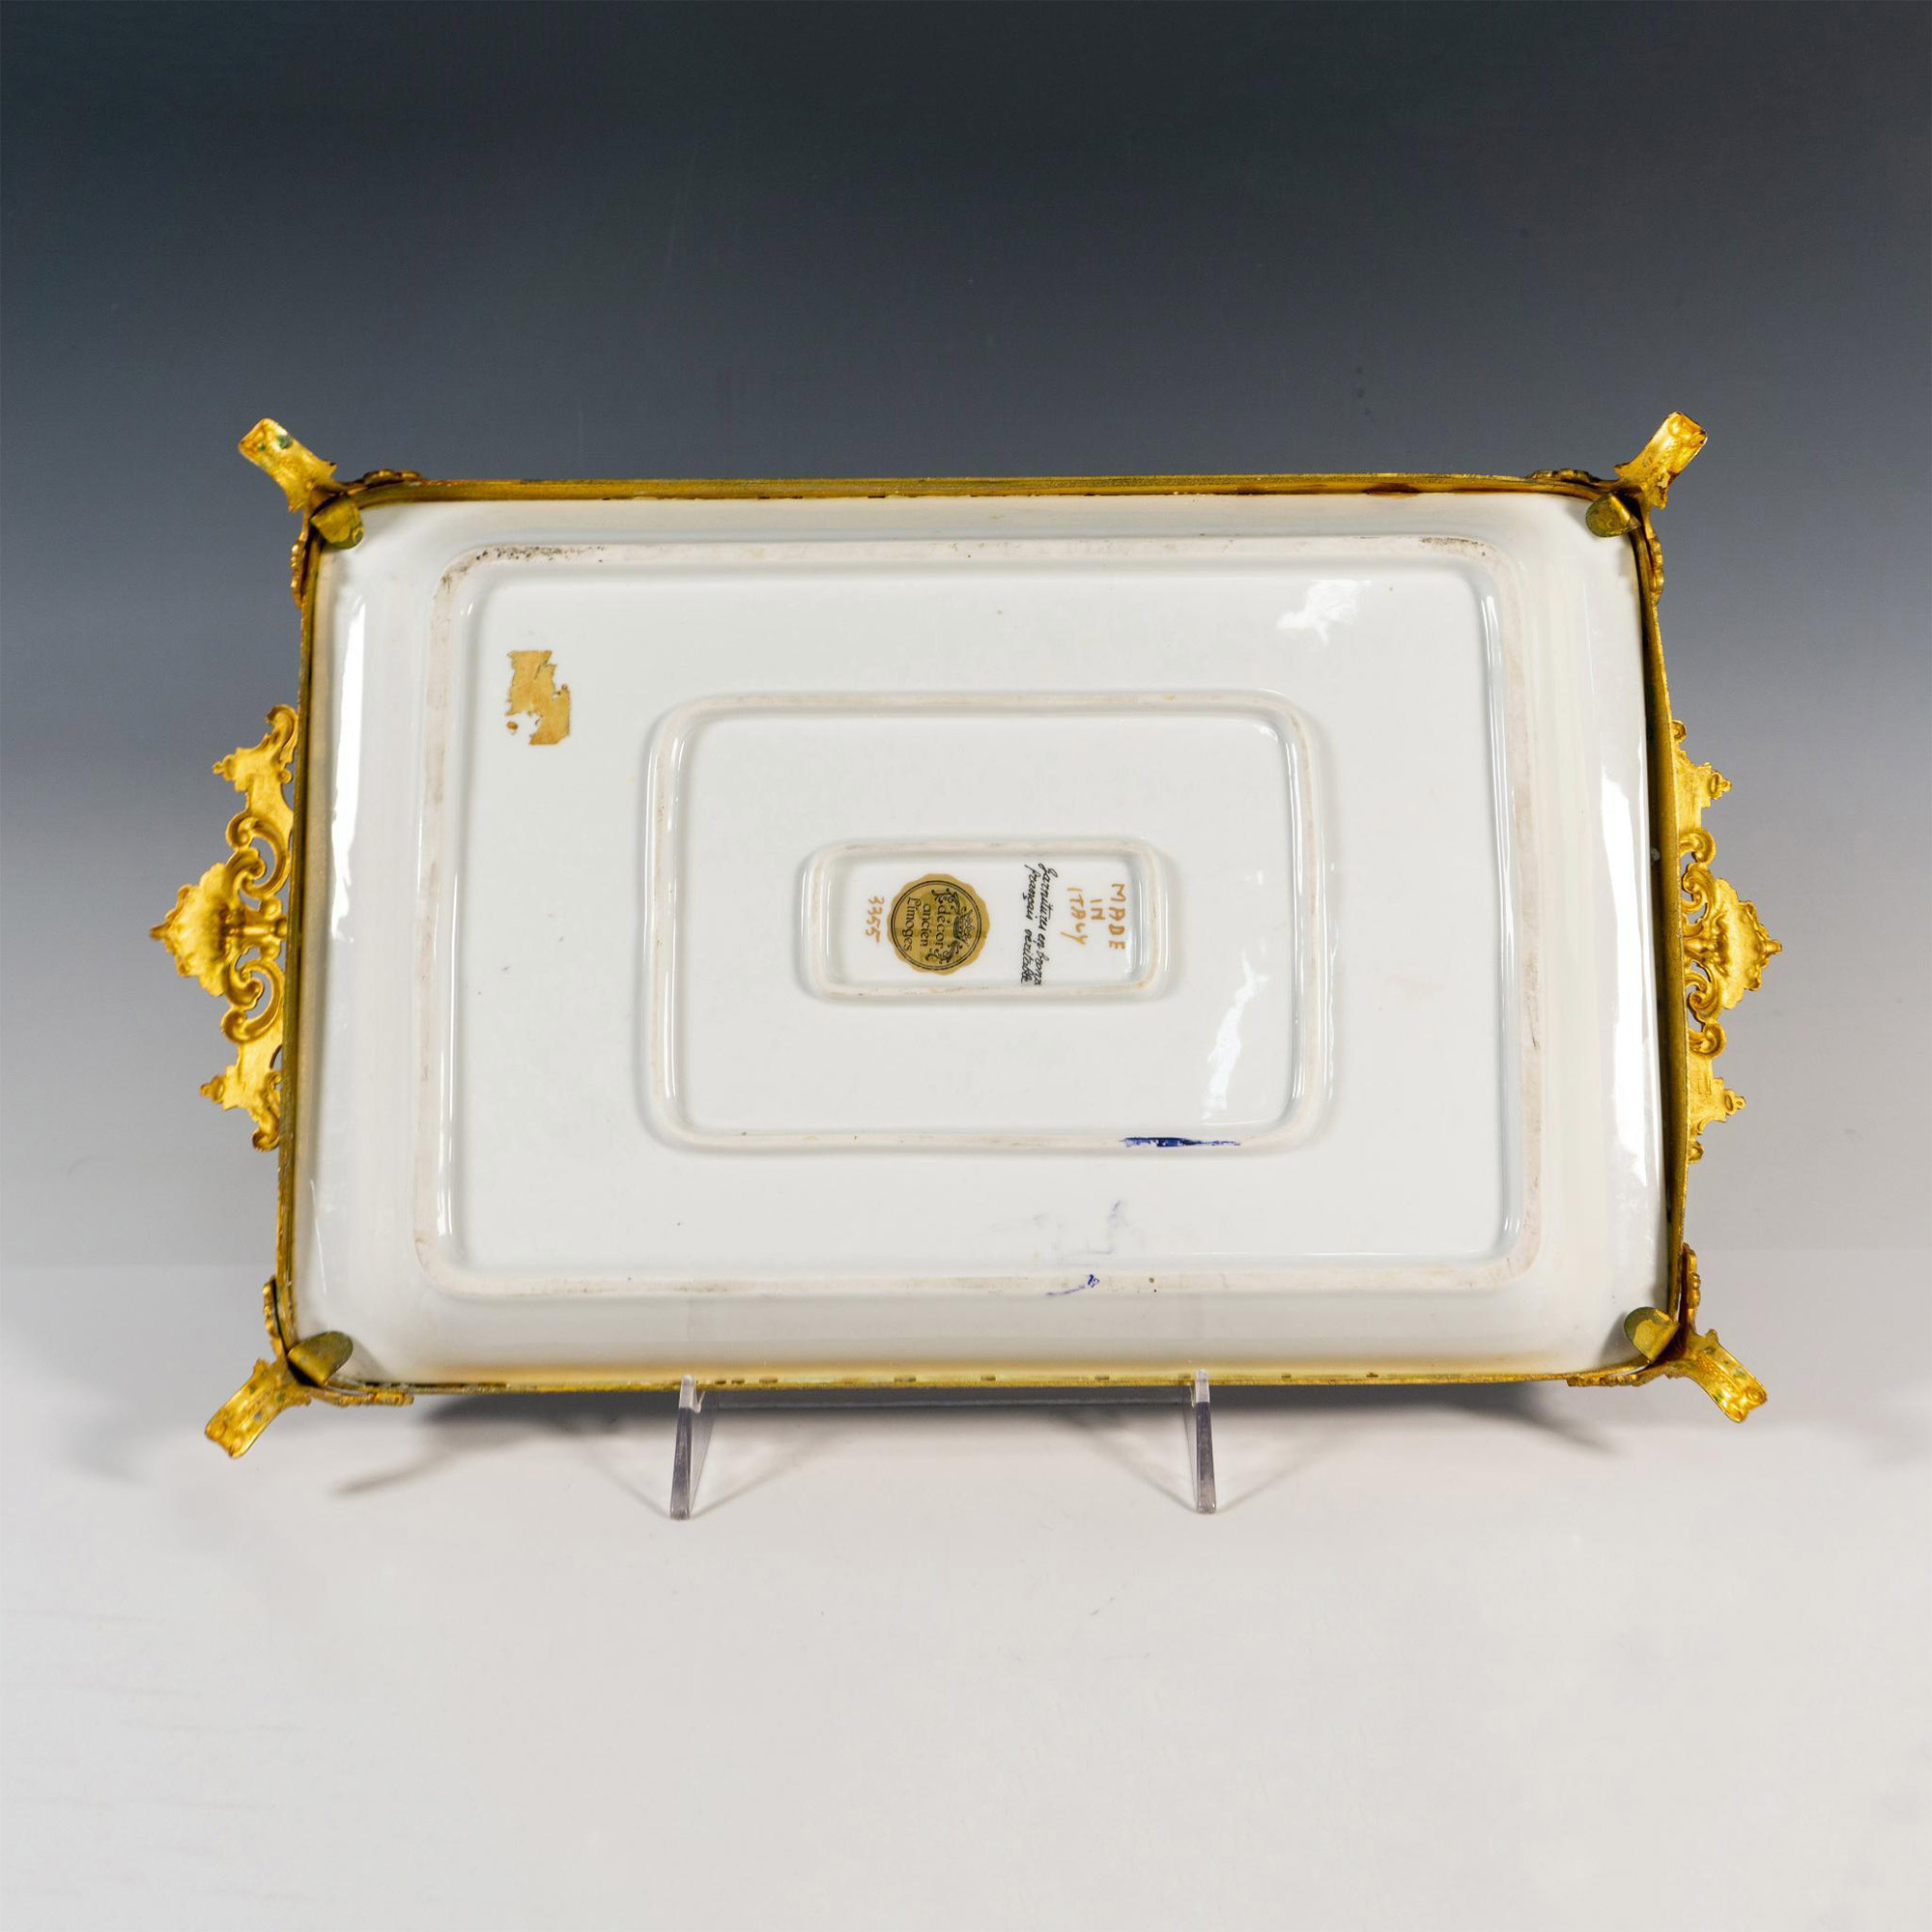 Decor Ancien Limoges Tray, French Bronze Fittings 3355 - Image 2 of 4